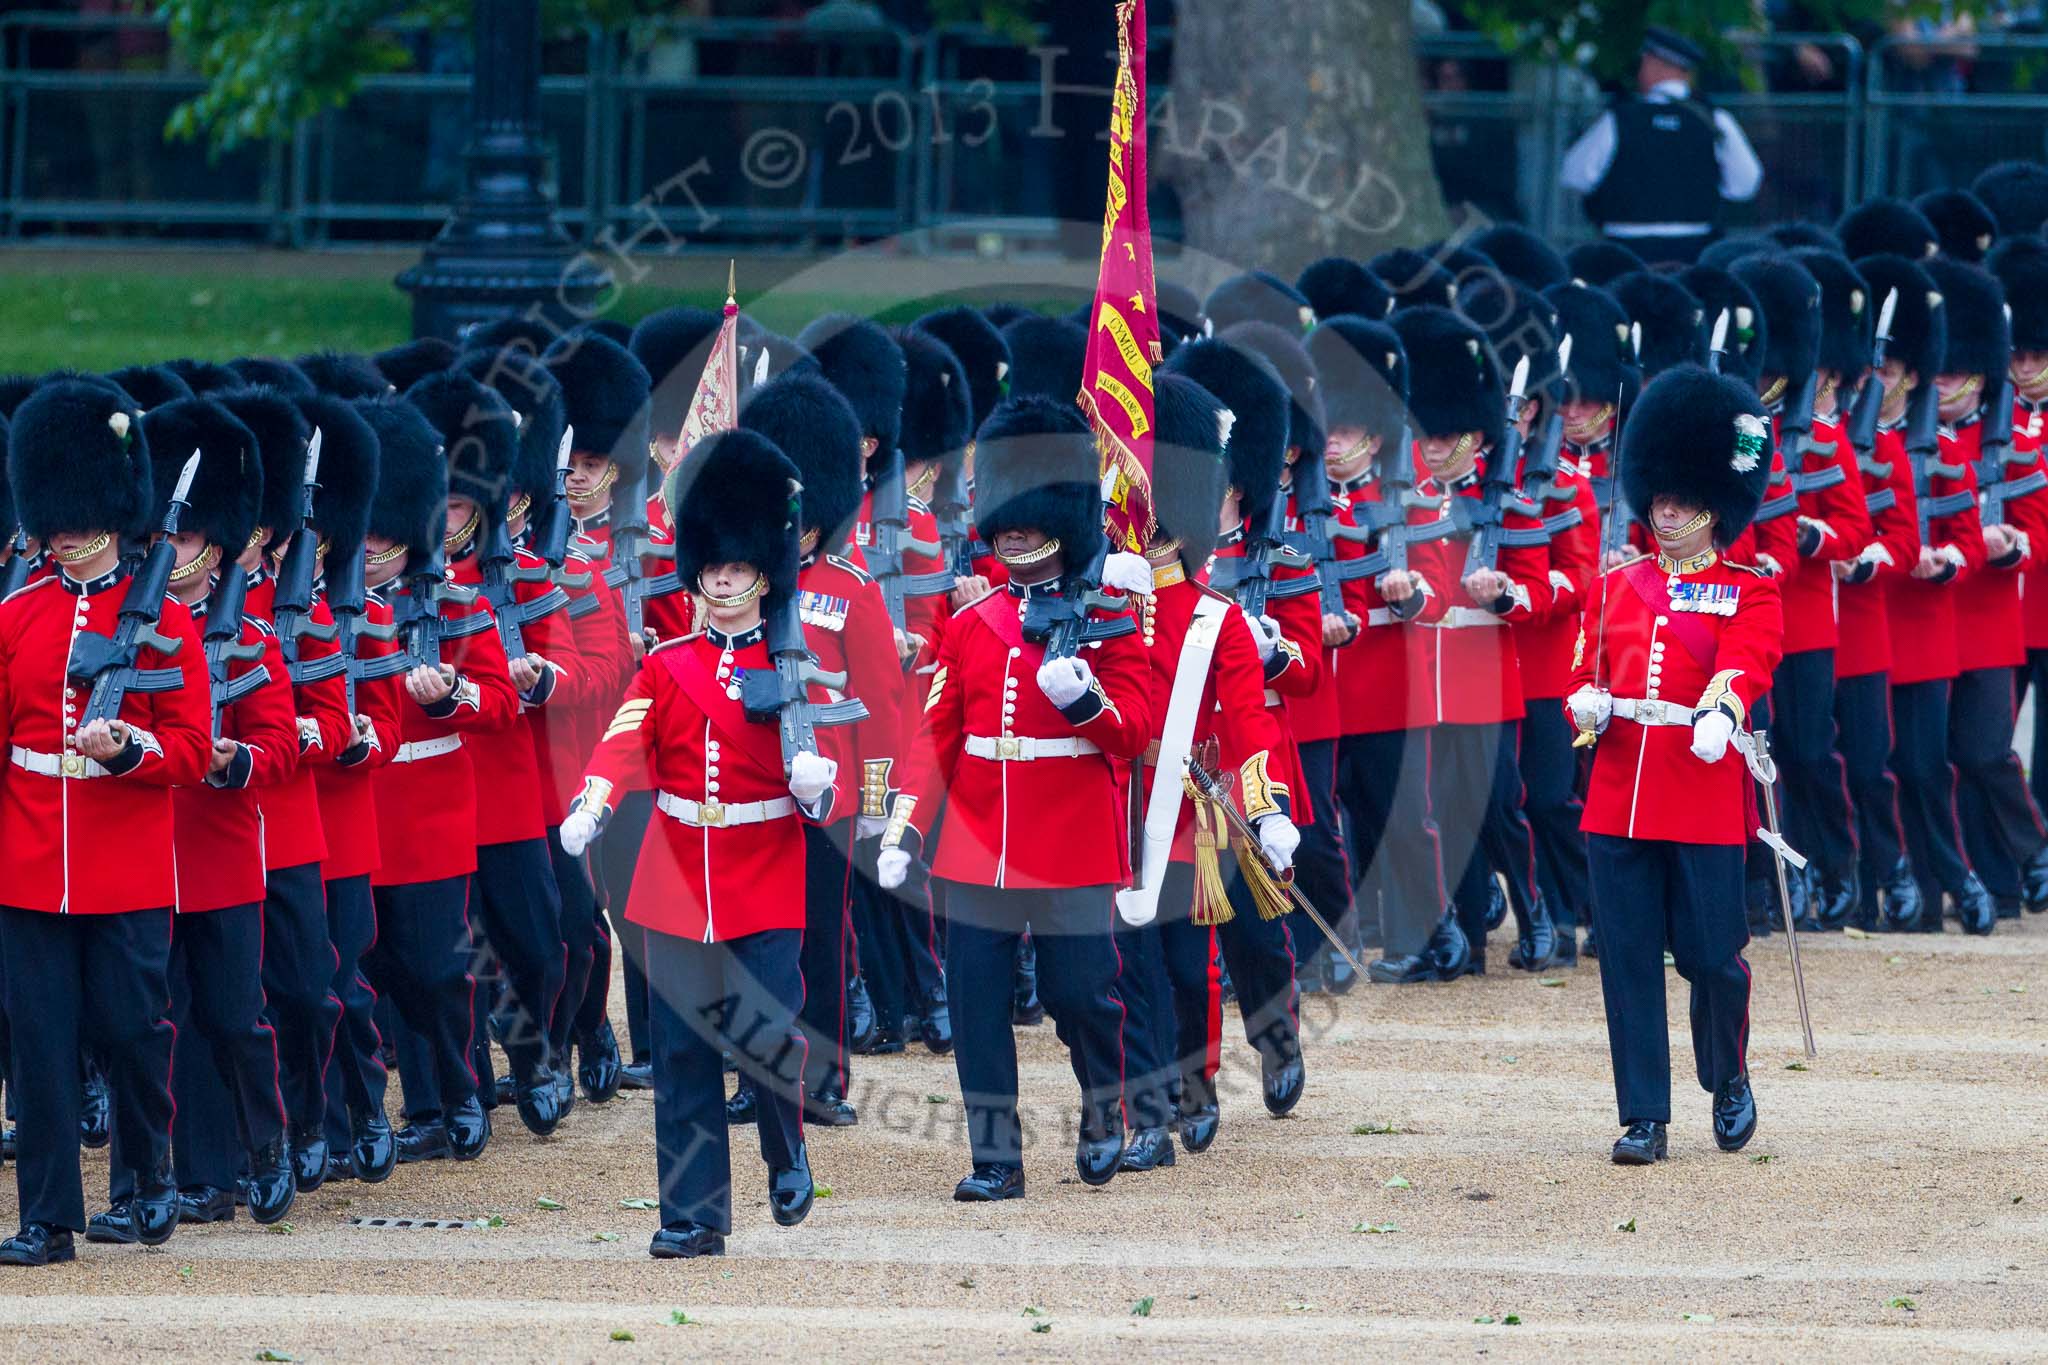 Trooping the Colour 2015. Image #496, 13 June 2015 11:42 Horse Guards Parade, London, UK